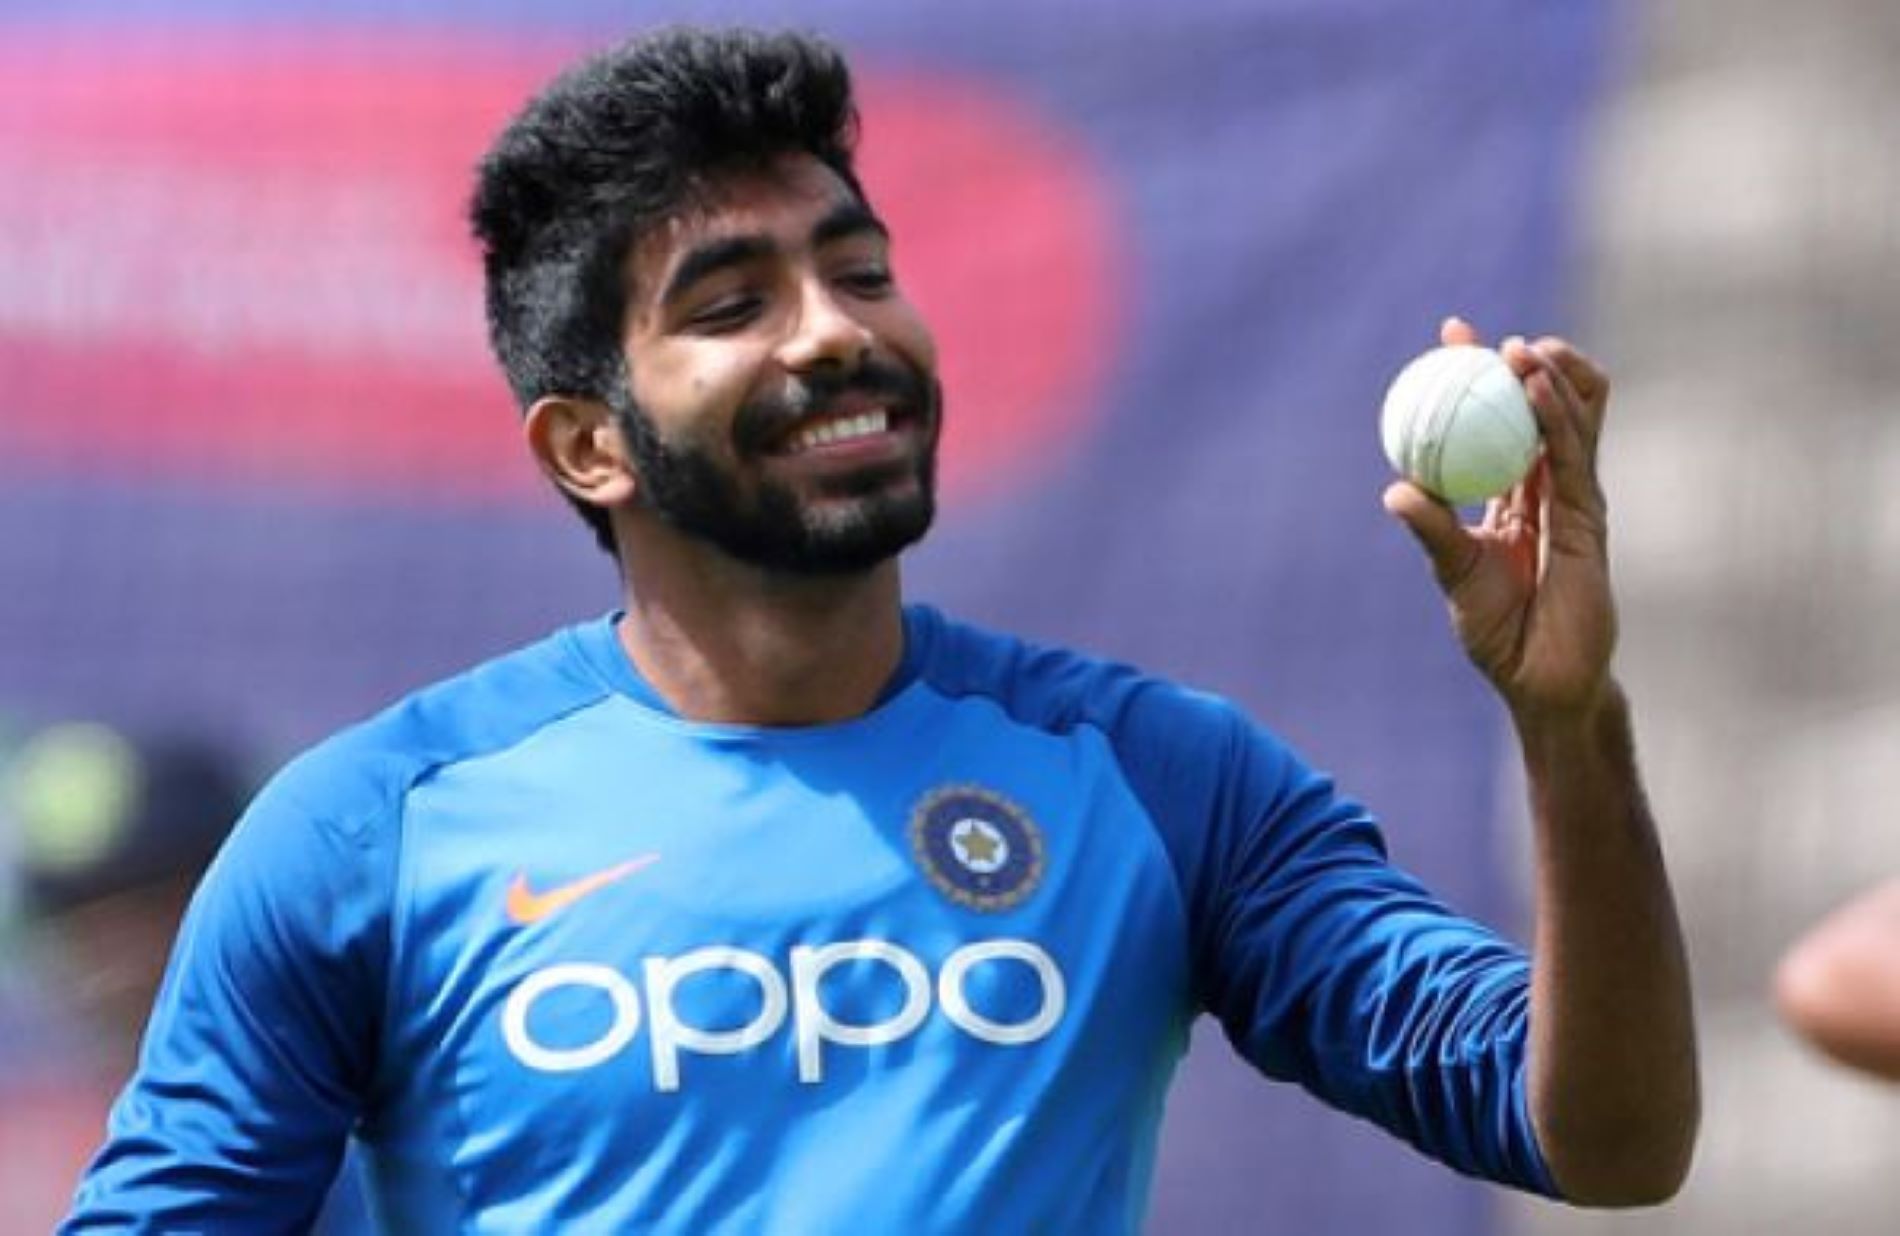 Bumrah has been in red-hot form for Team India in the ongoing World Cup